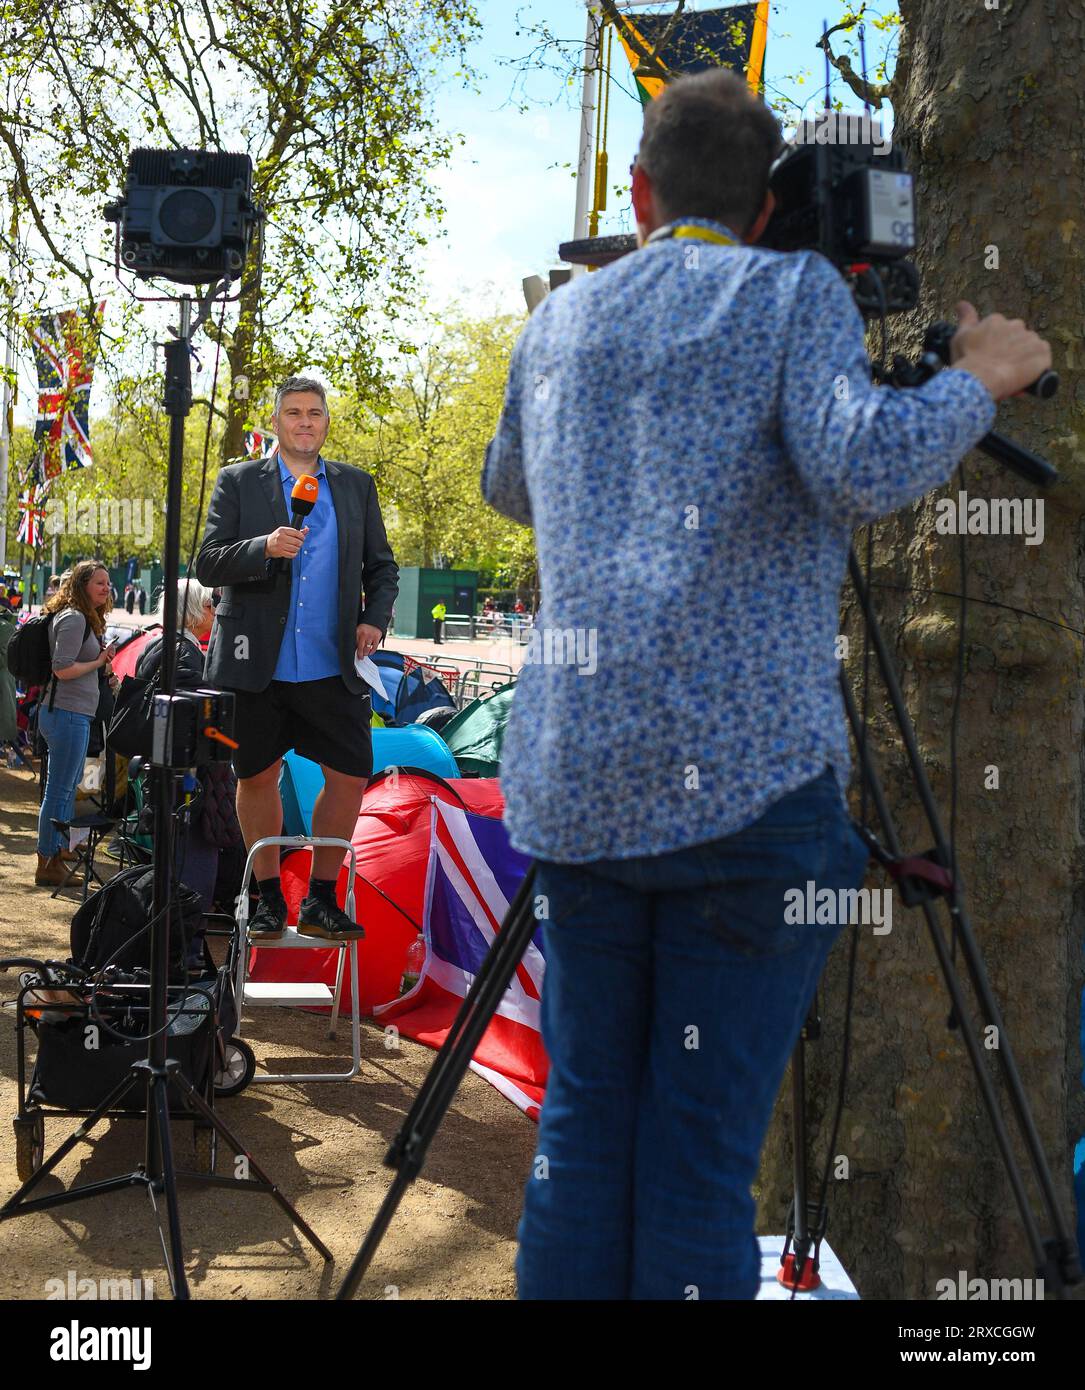 A Tv crew doing a piece to camera at the kings coronation build up on the Mall. With the reporter wearing shorts with his suit attire. Stock Photo